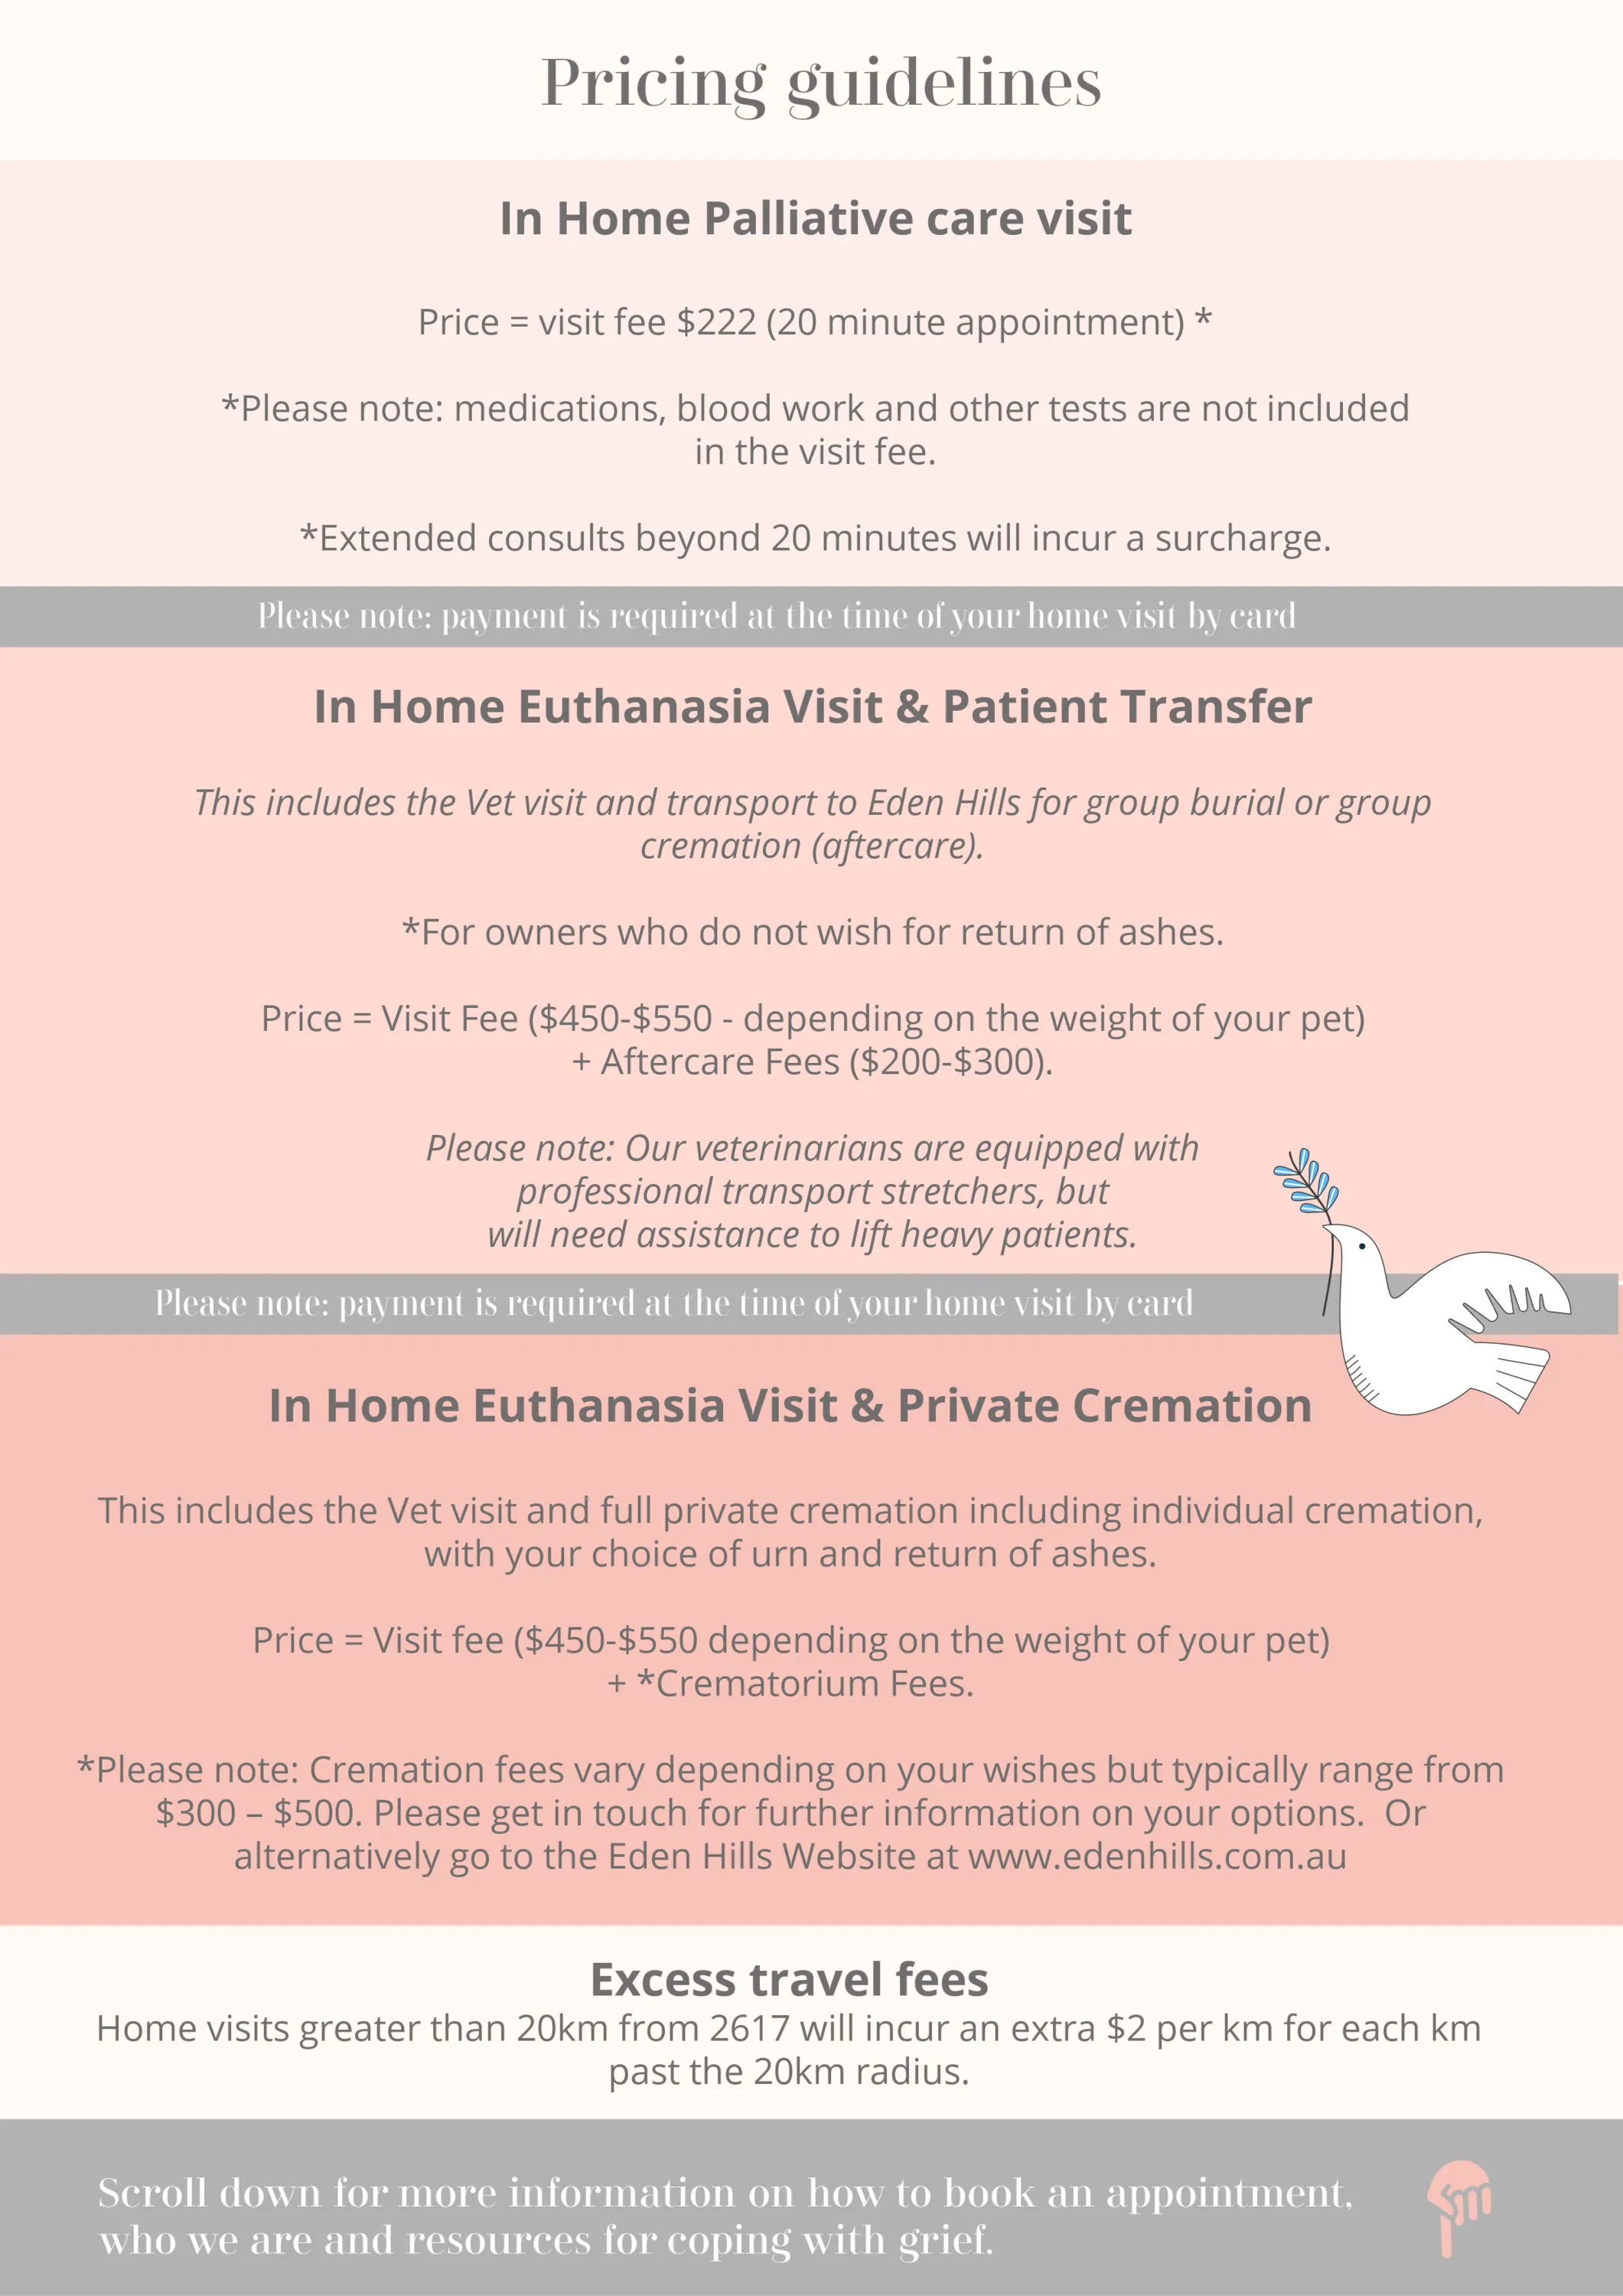 Palliative care pricing guidelines